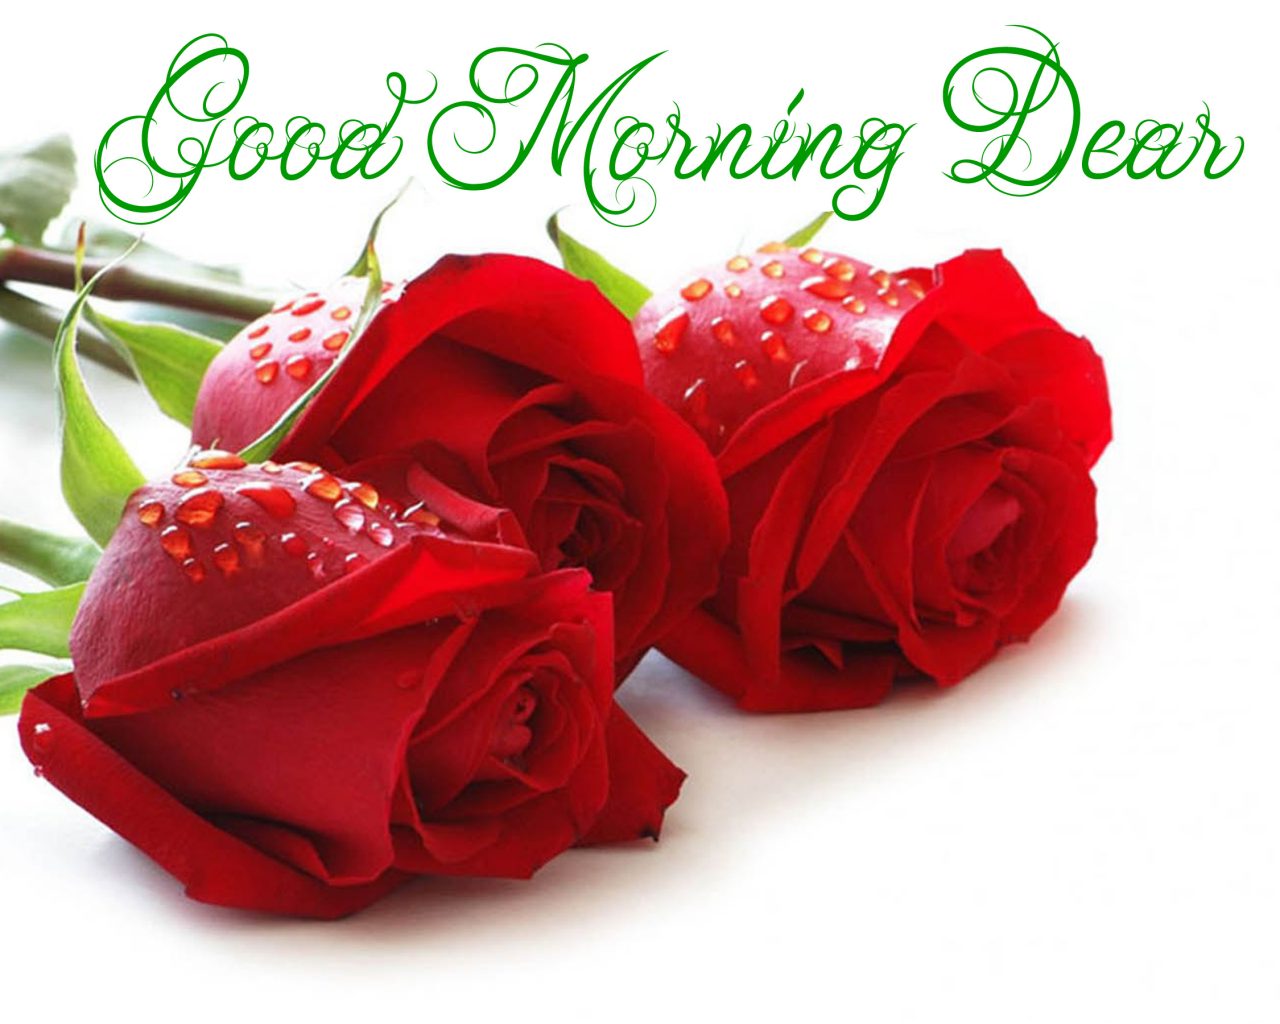 Good Morning Dear Red Roses With Water Droplets - Good Morning Image Hd With Rose - HD Wallpaper 